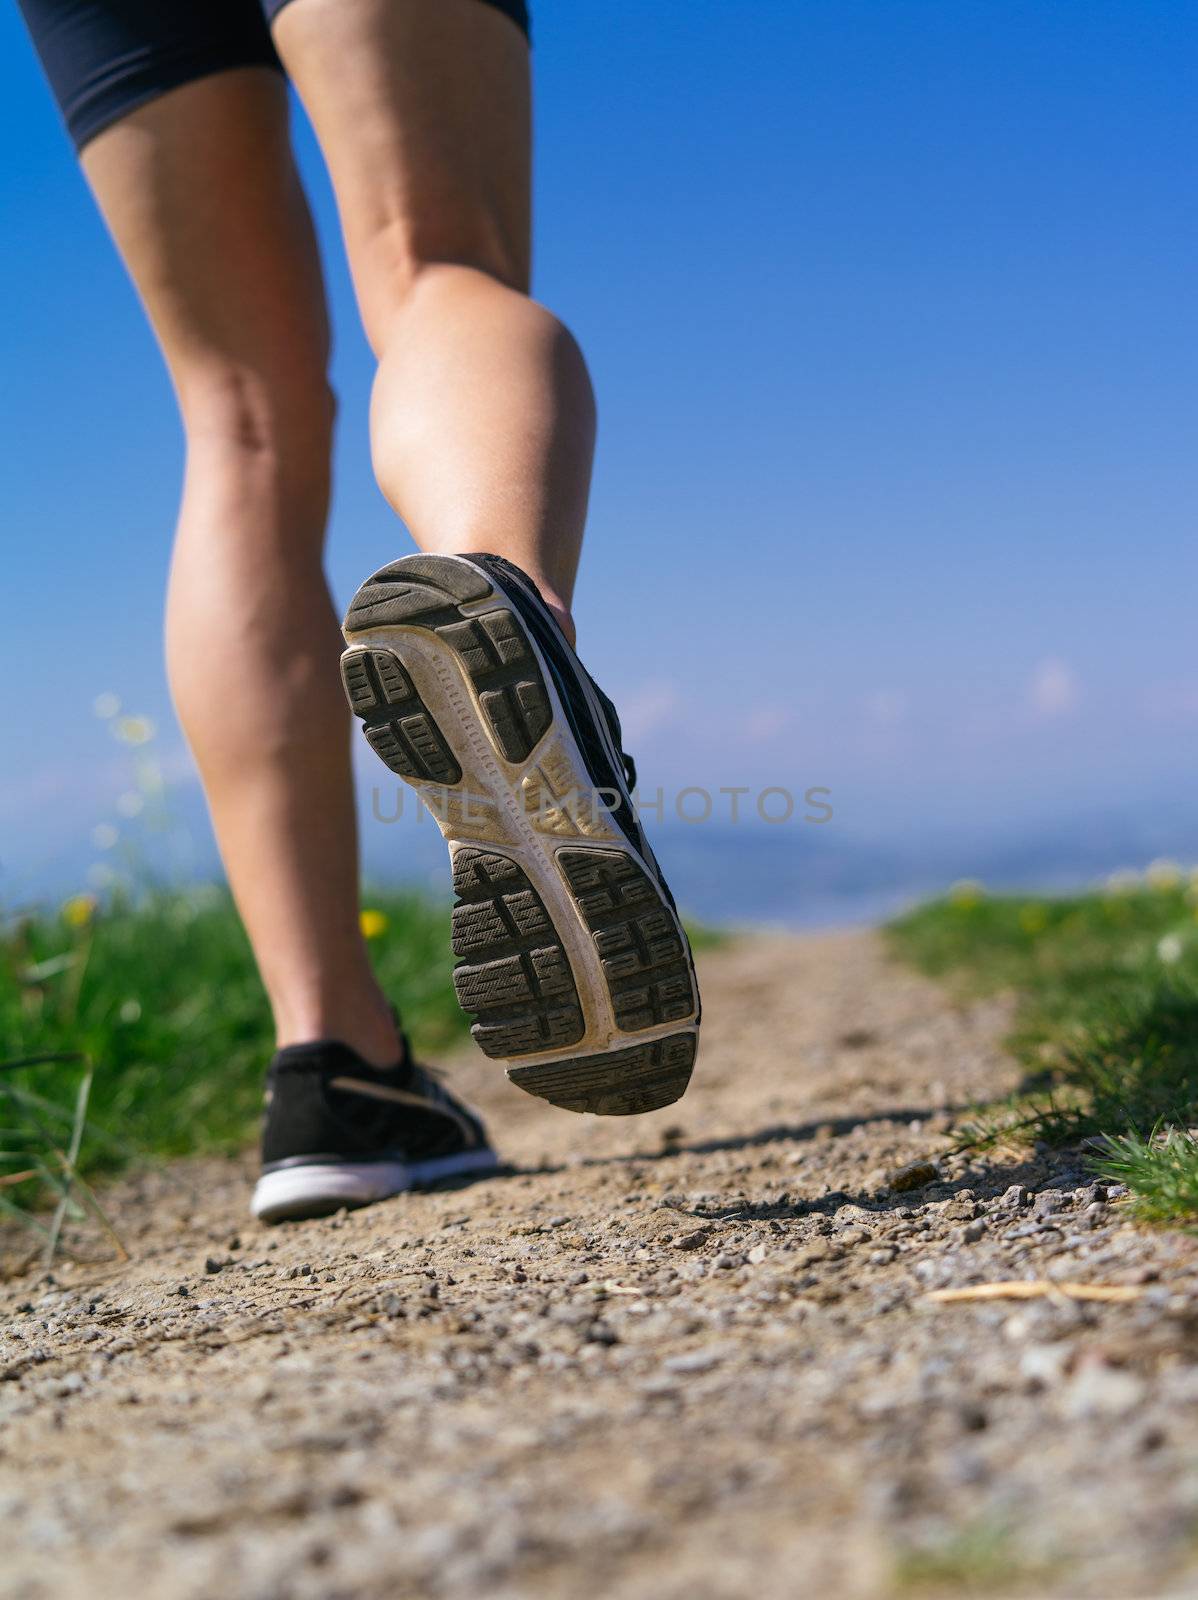 Legs and shoes of a woman jogger by sumners